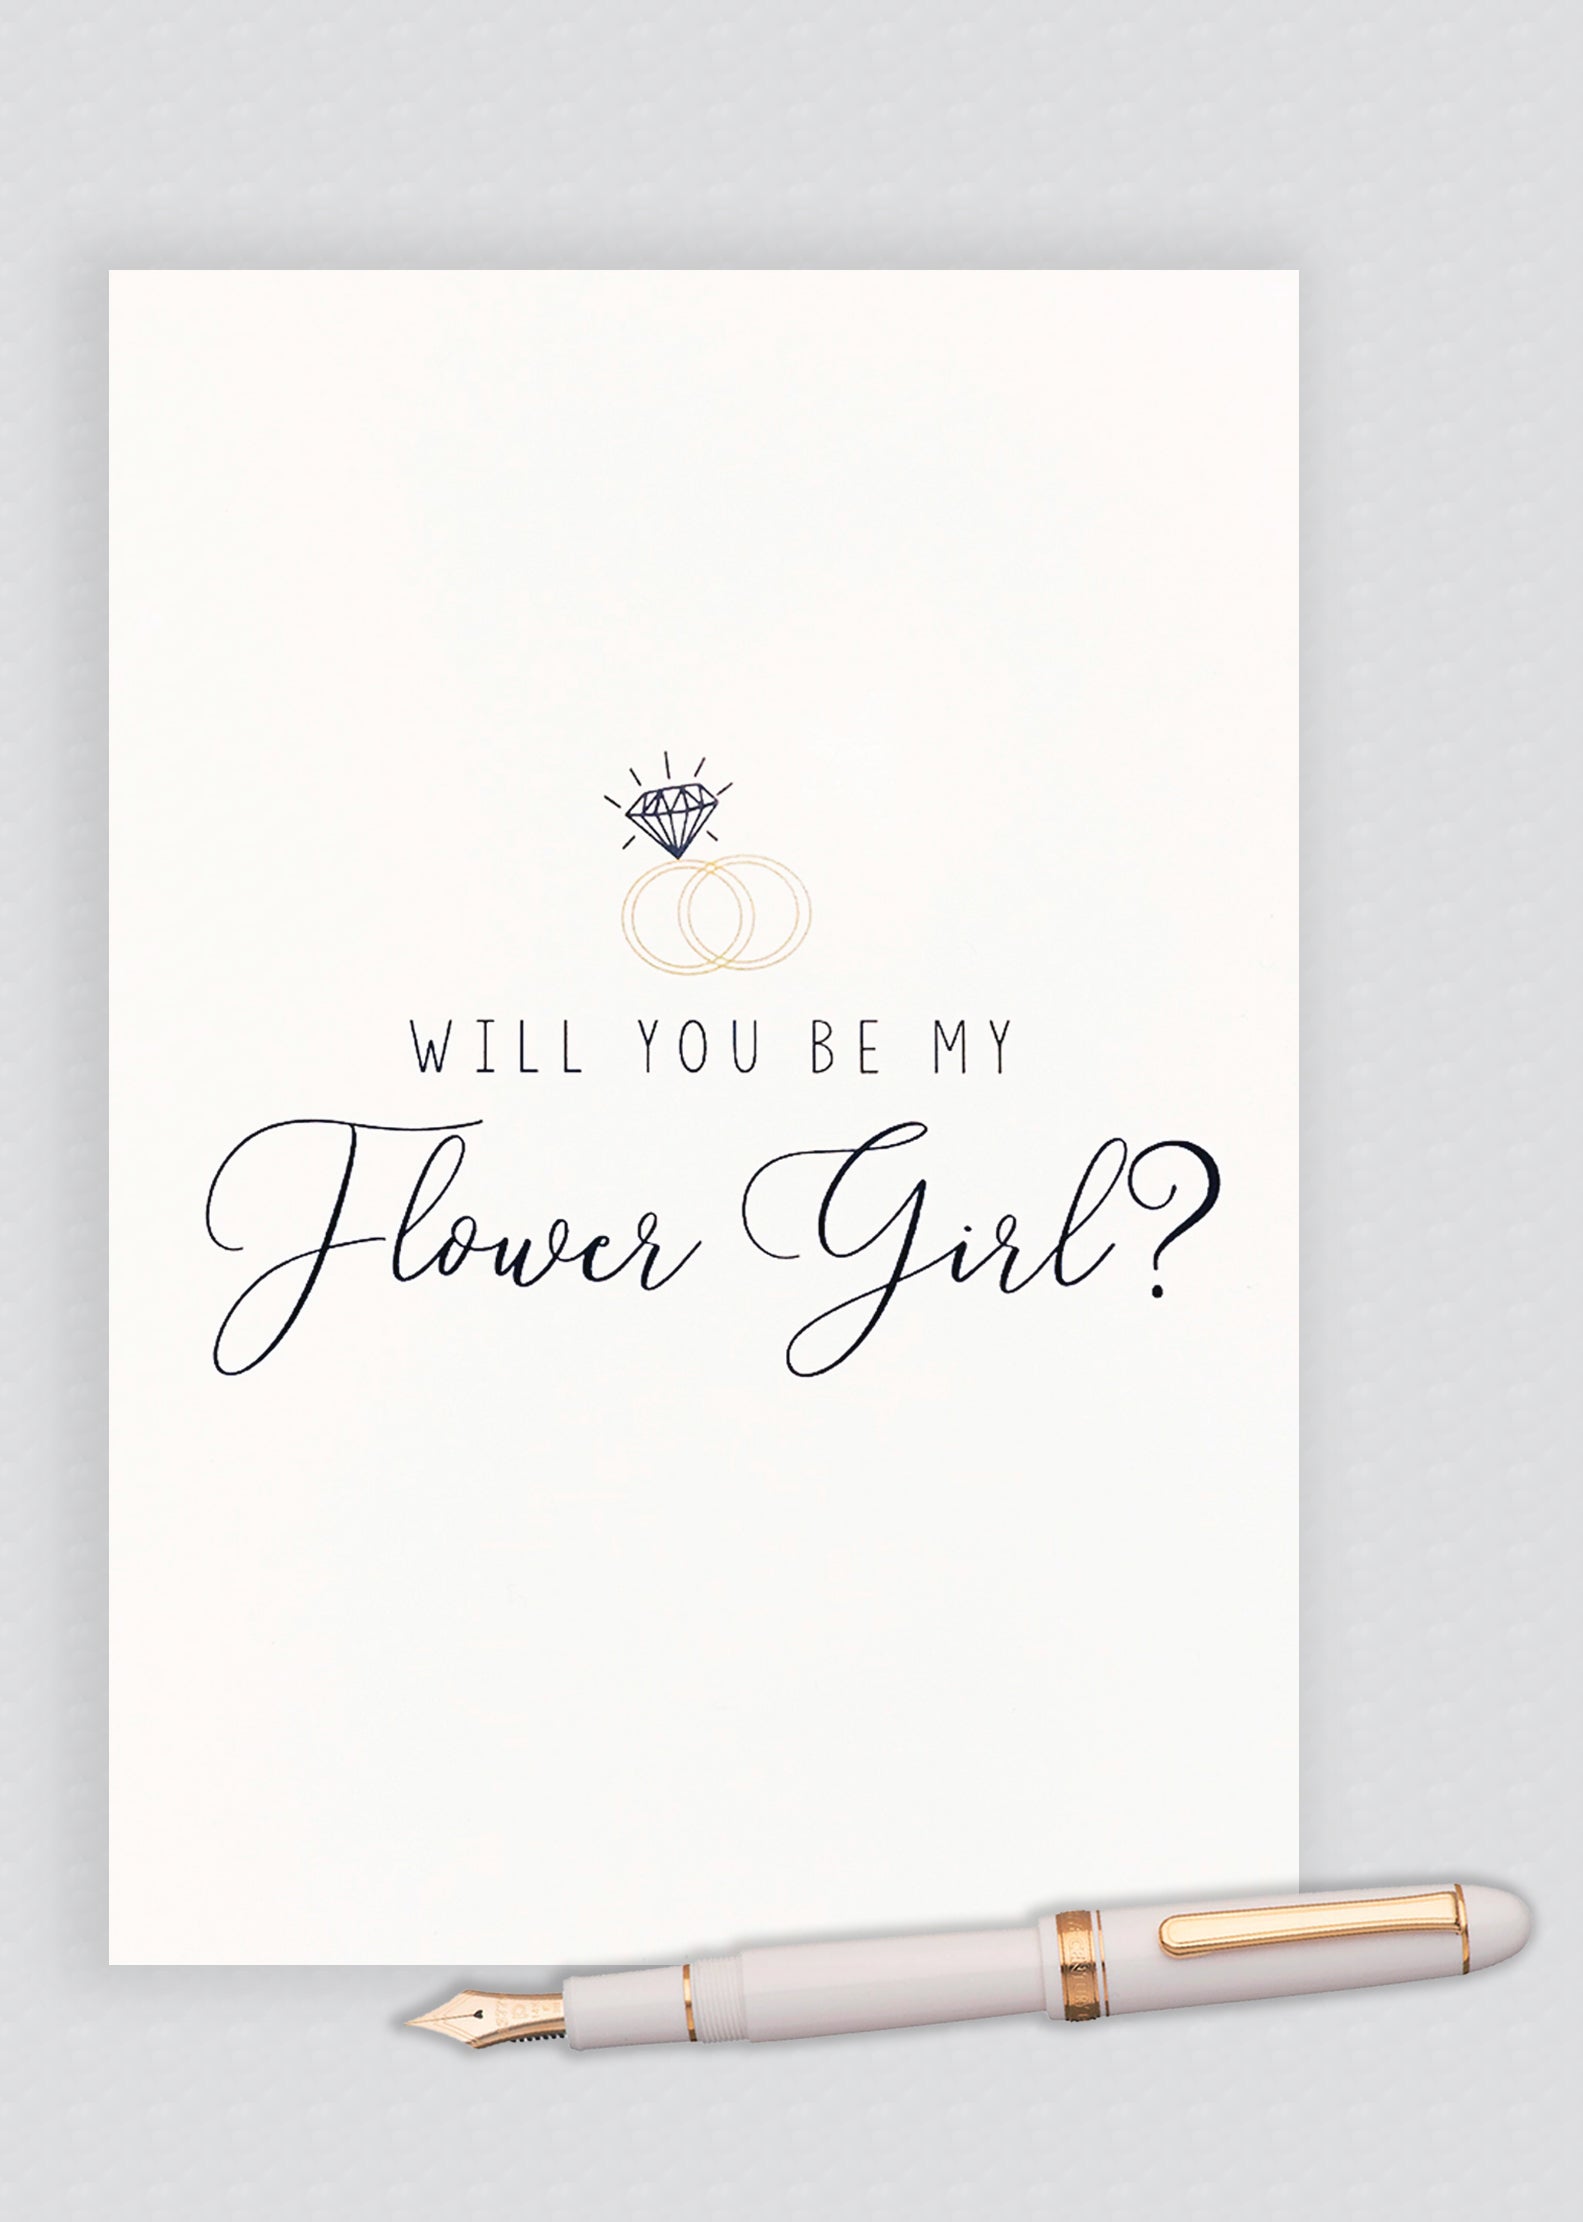 Will You Be My Flower Girl? Proposal Card - A